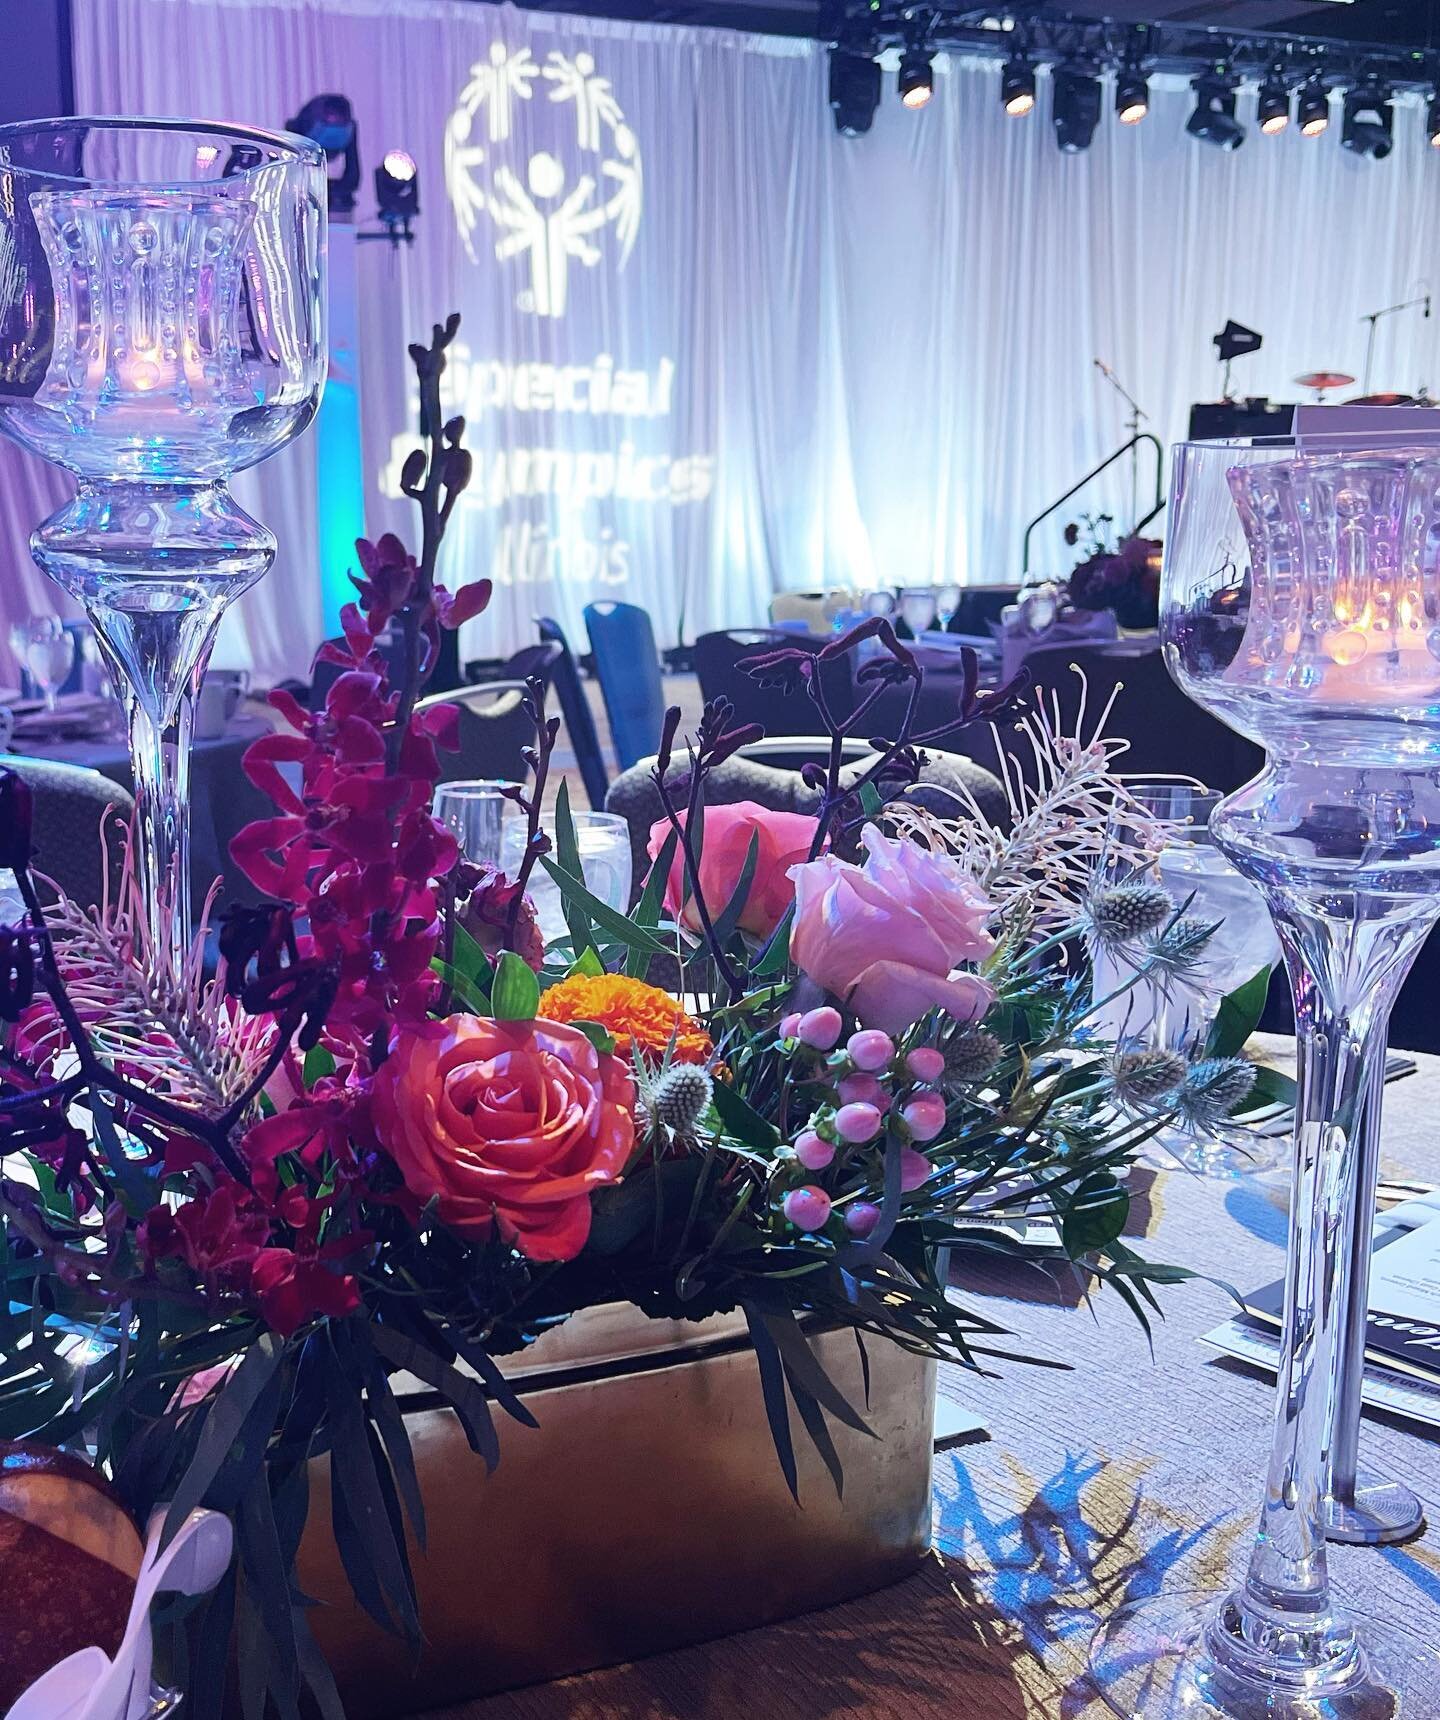 The only thing we love more than creative table looks is partnering with an awesome, life-changing organization! Thank you @specialolympicsillinois for letting us be a part of this memorable night❤️ 
.
#chicagoevents #chicago #chicagofloral #gala #ev